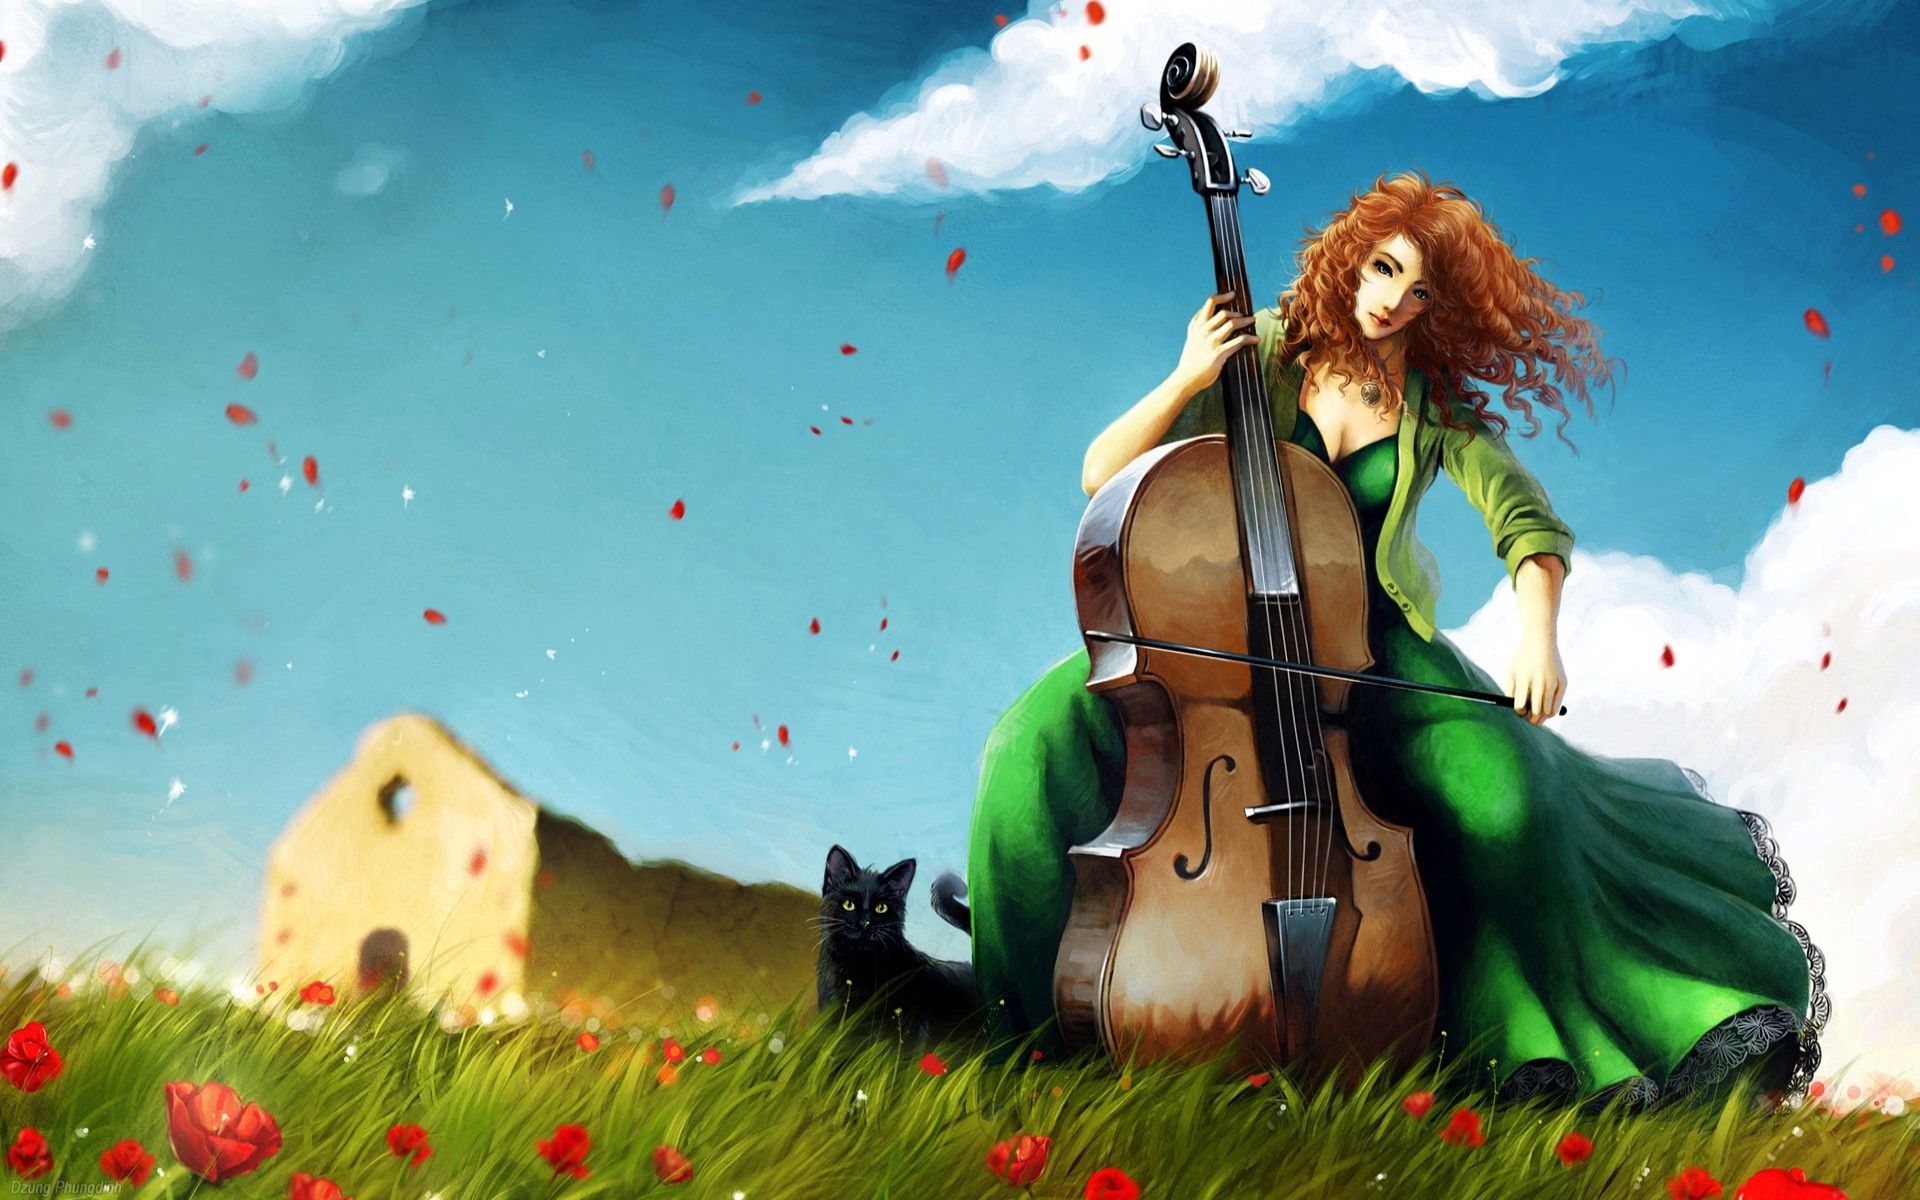 Free Images wind, art, musician, girl Game